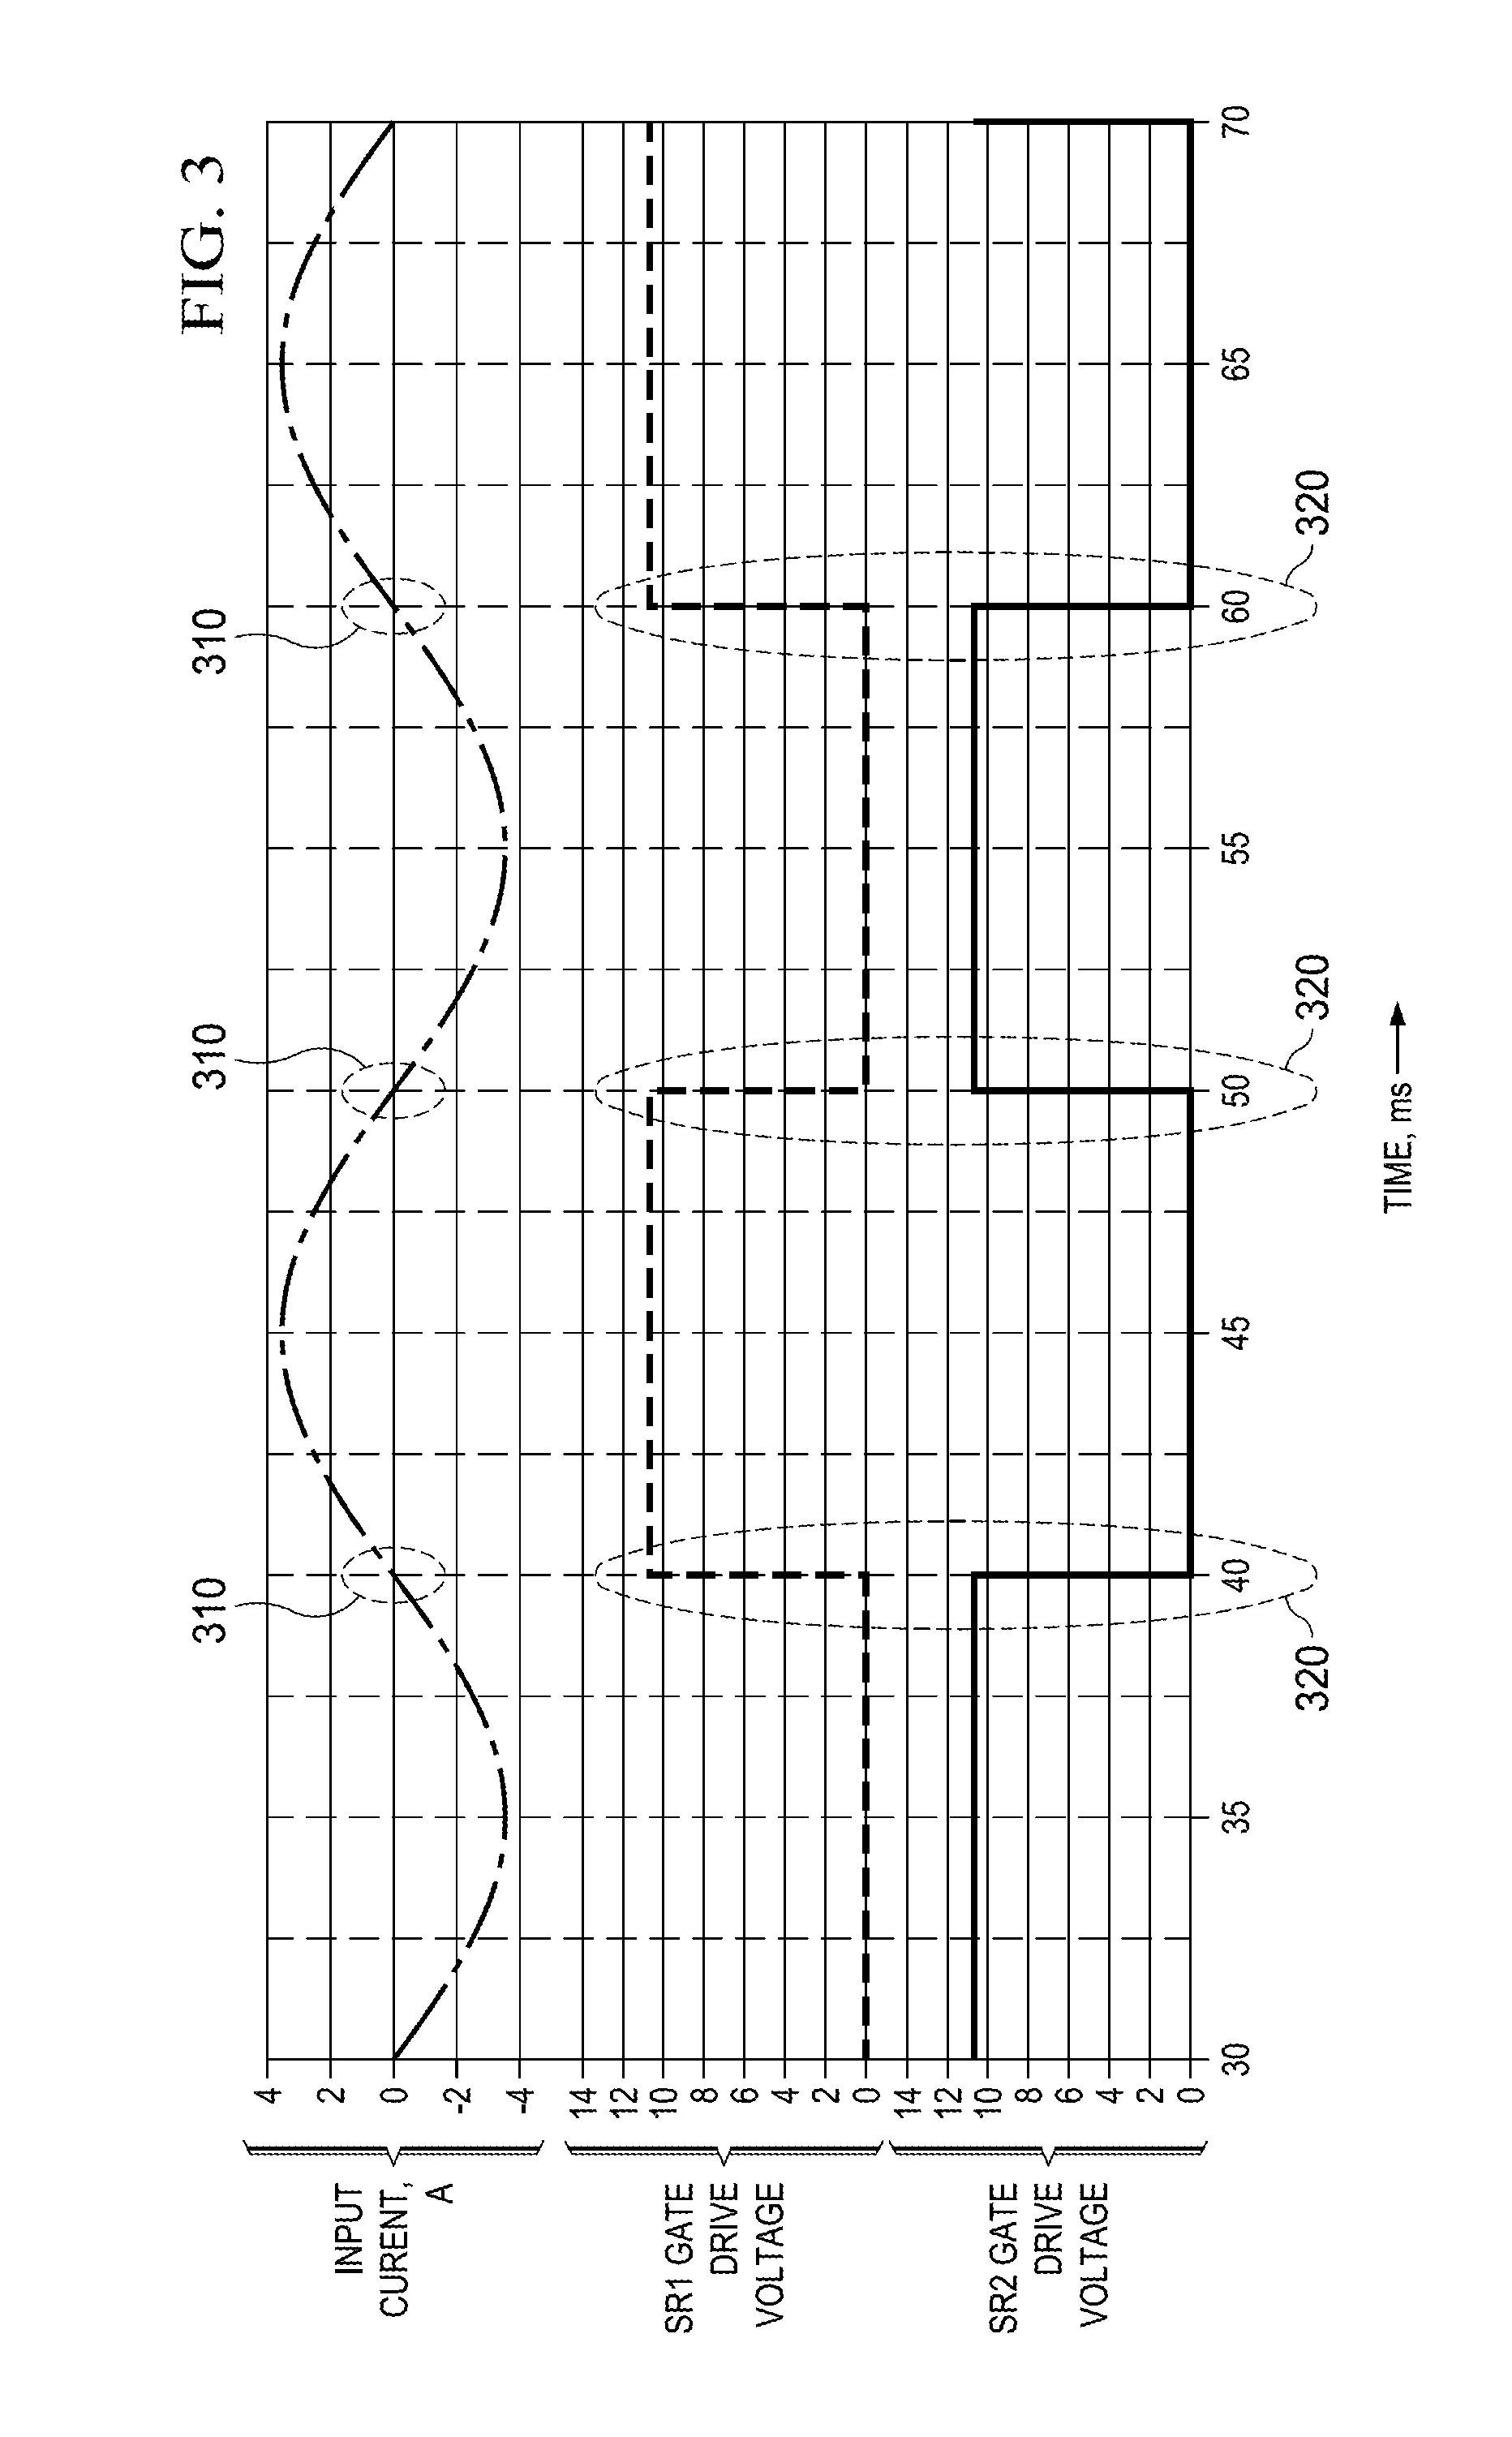 Controller for a synchronous rectifier switch